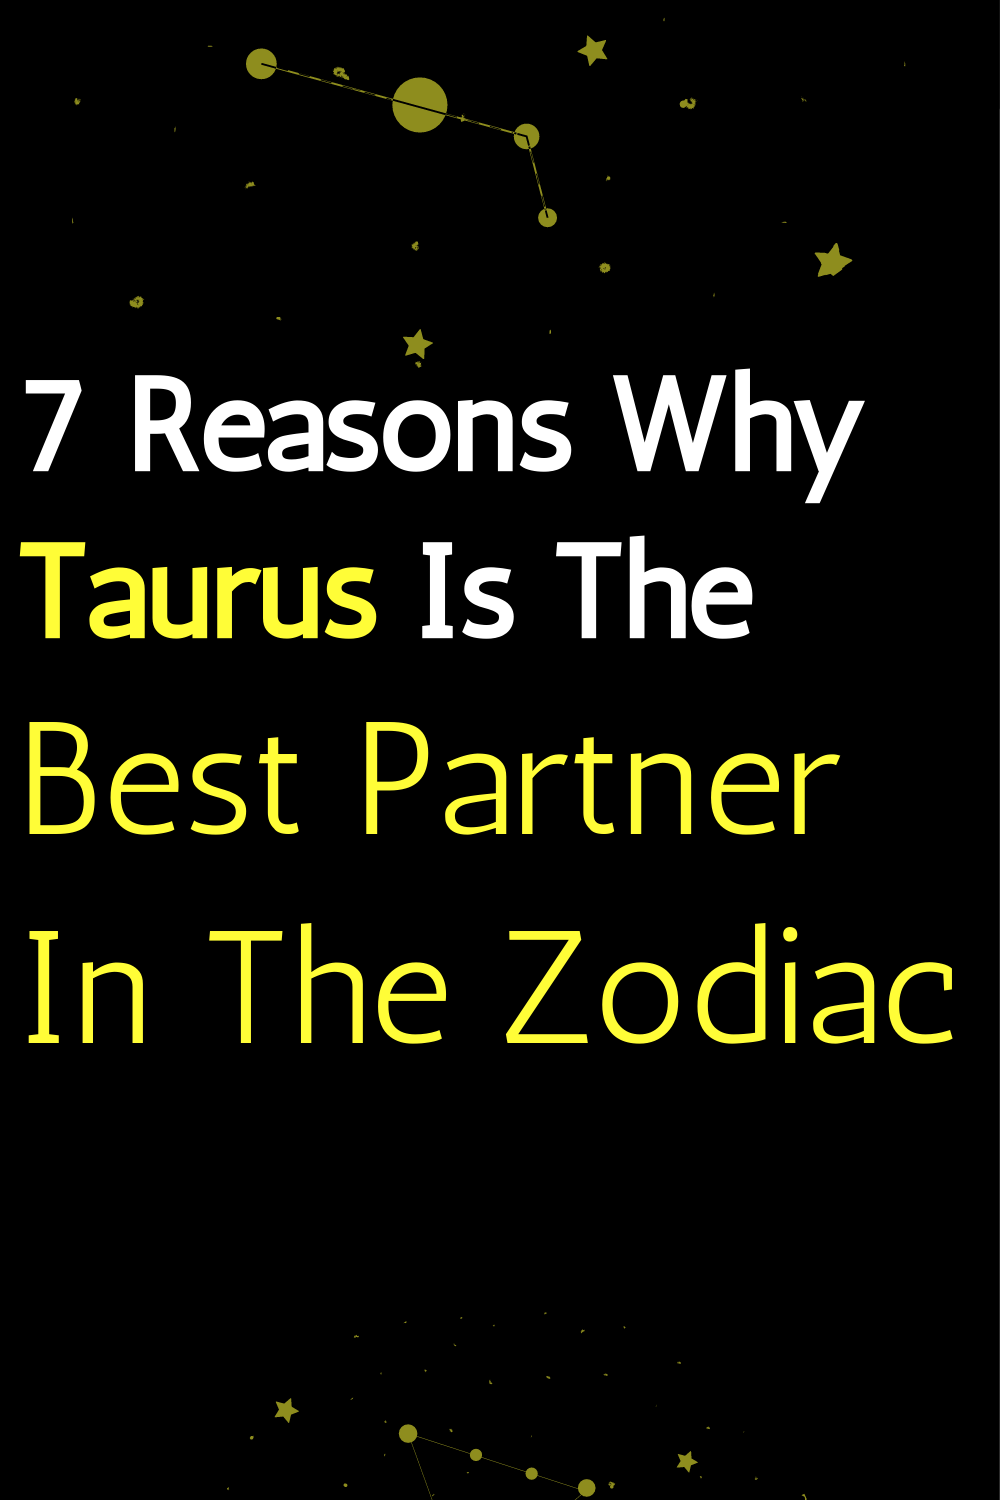 7 Reasons Why Taurus Is The Best Partner In The Zodiac